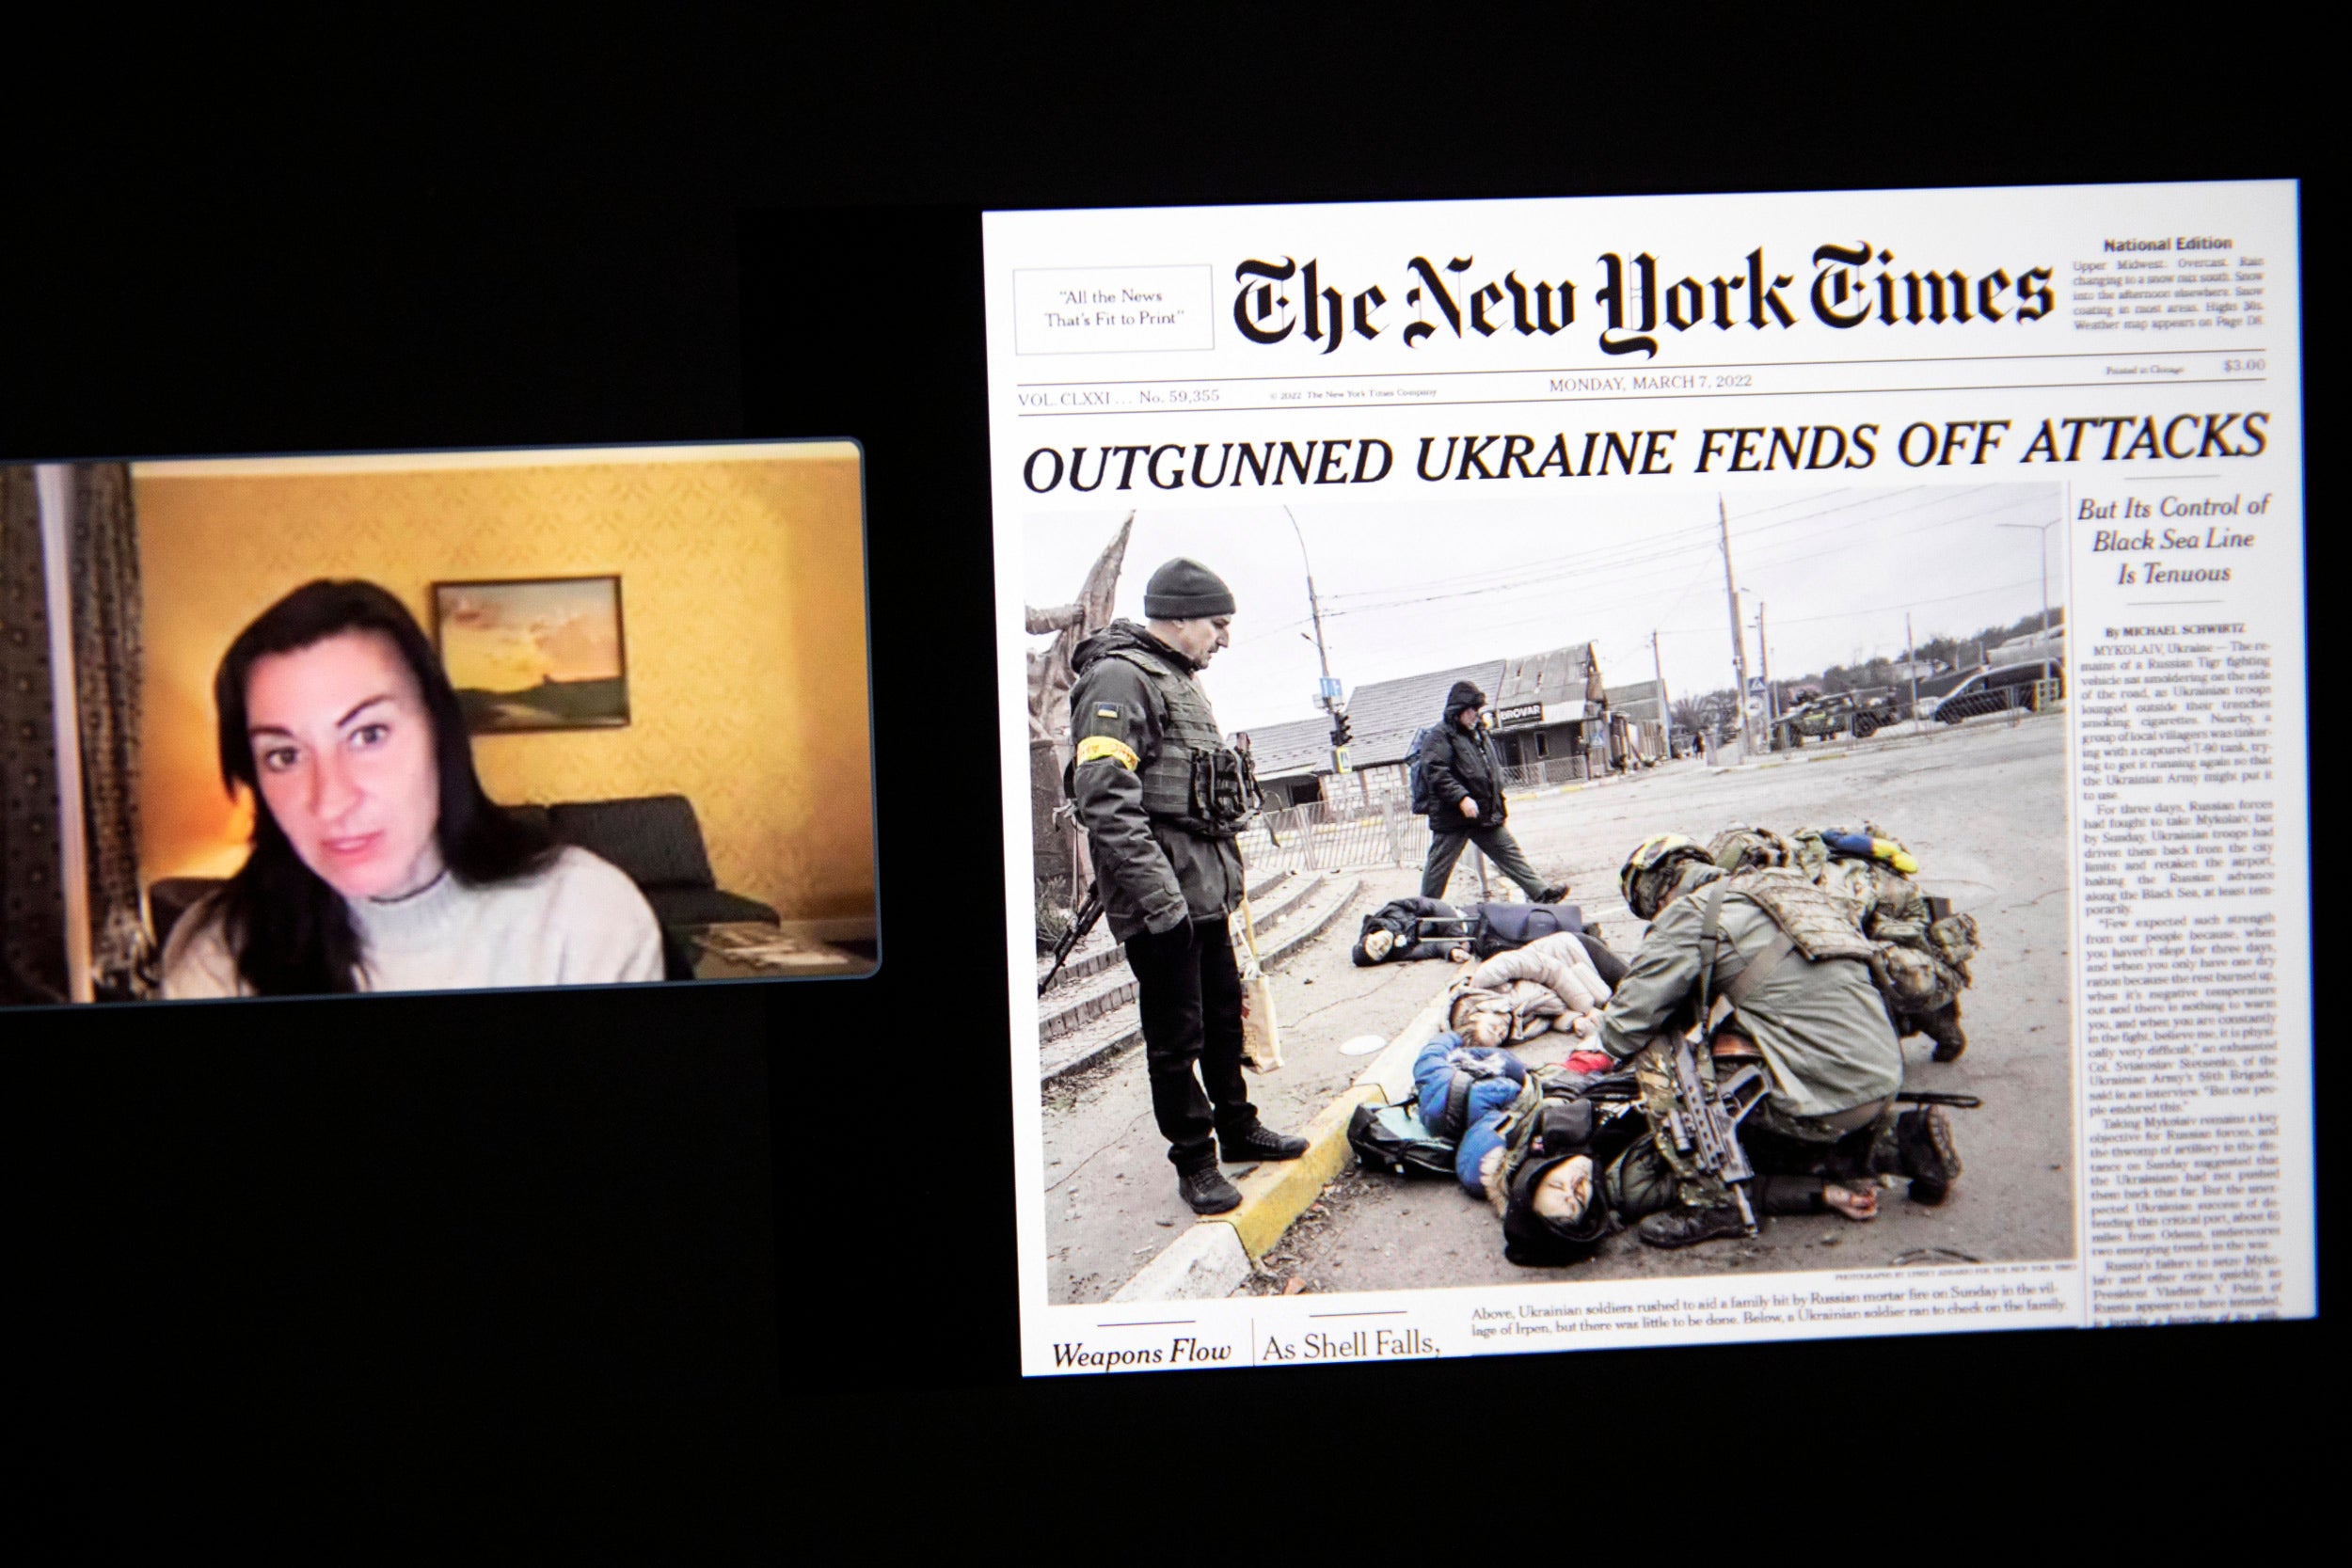 Lynsey Addario (left) shares her photograph from Ukraine that ran on the cover of the New York Times